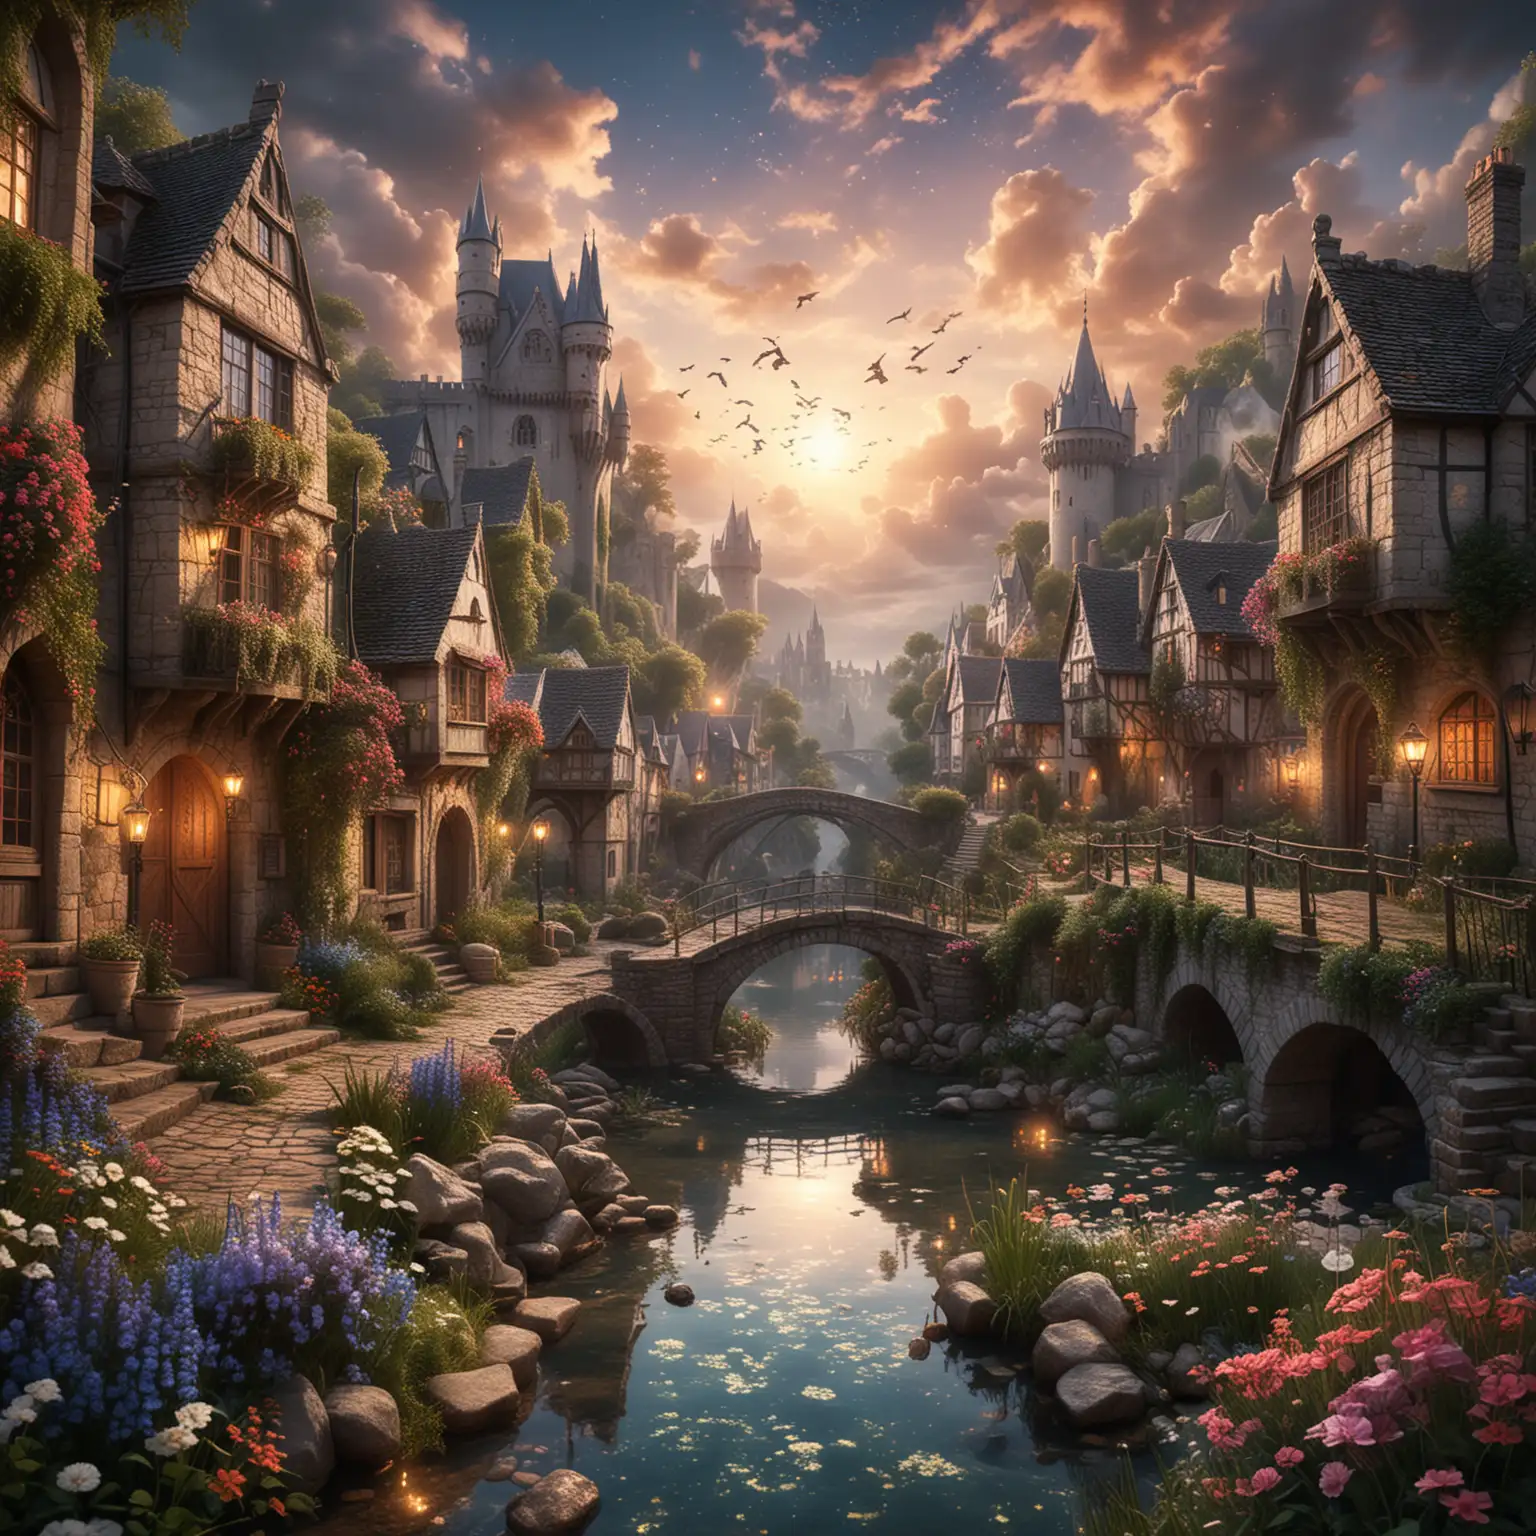 Enchanted World with Medieval Castles Villages and Magical Creatures